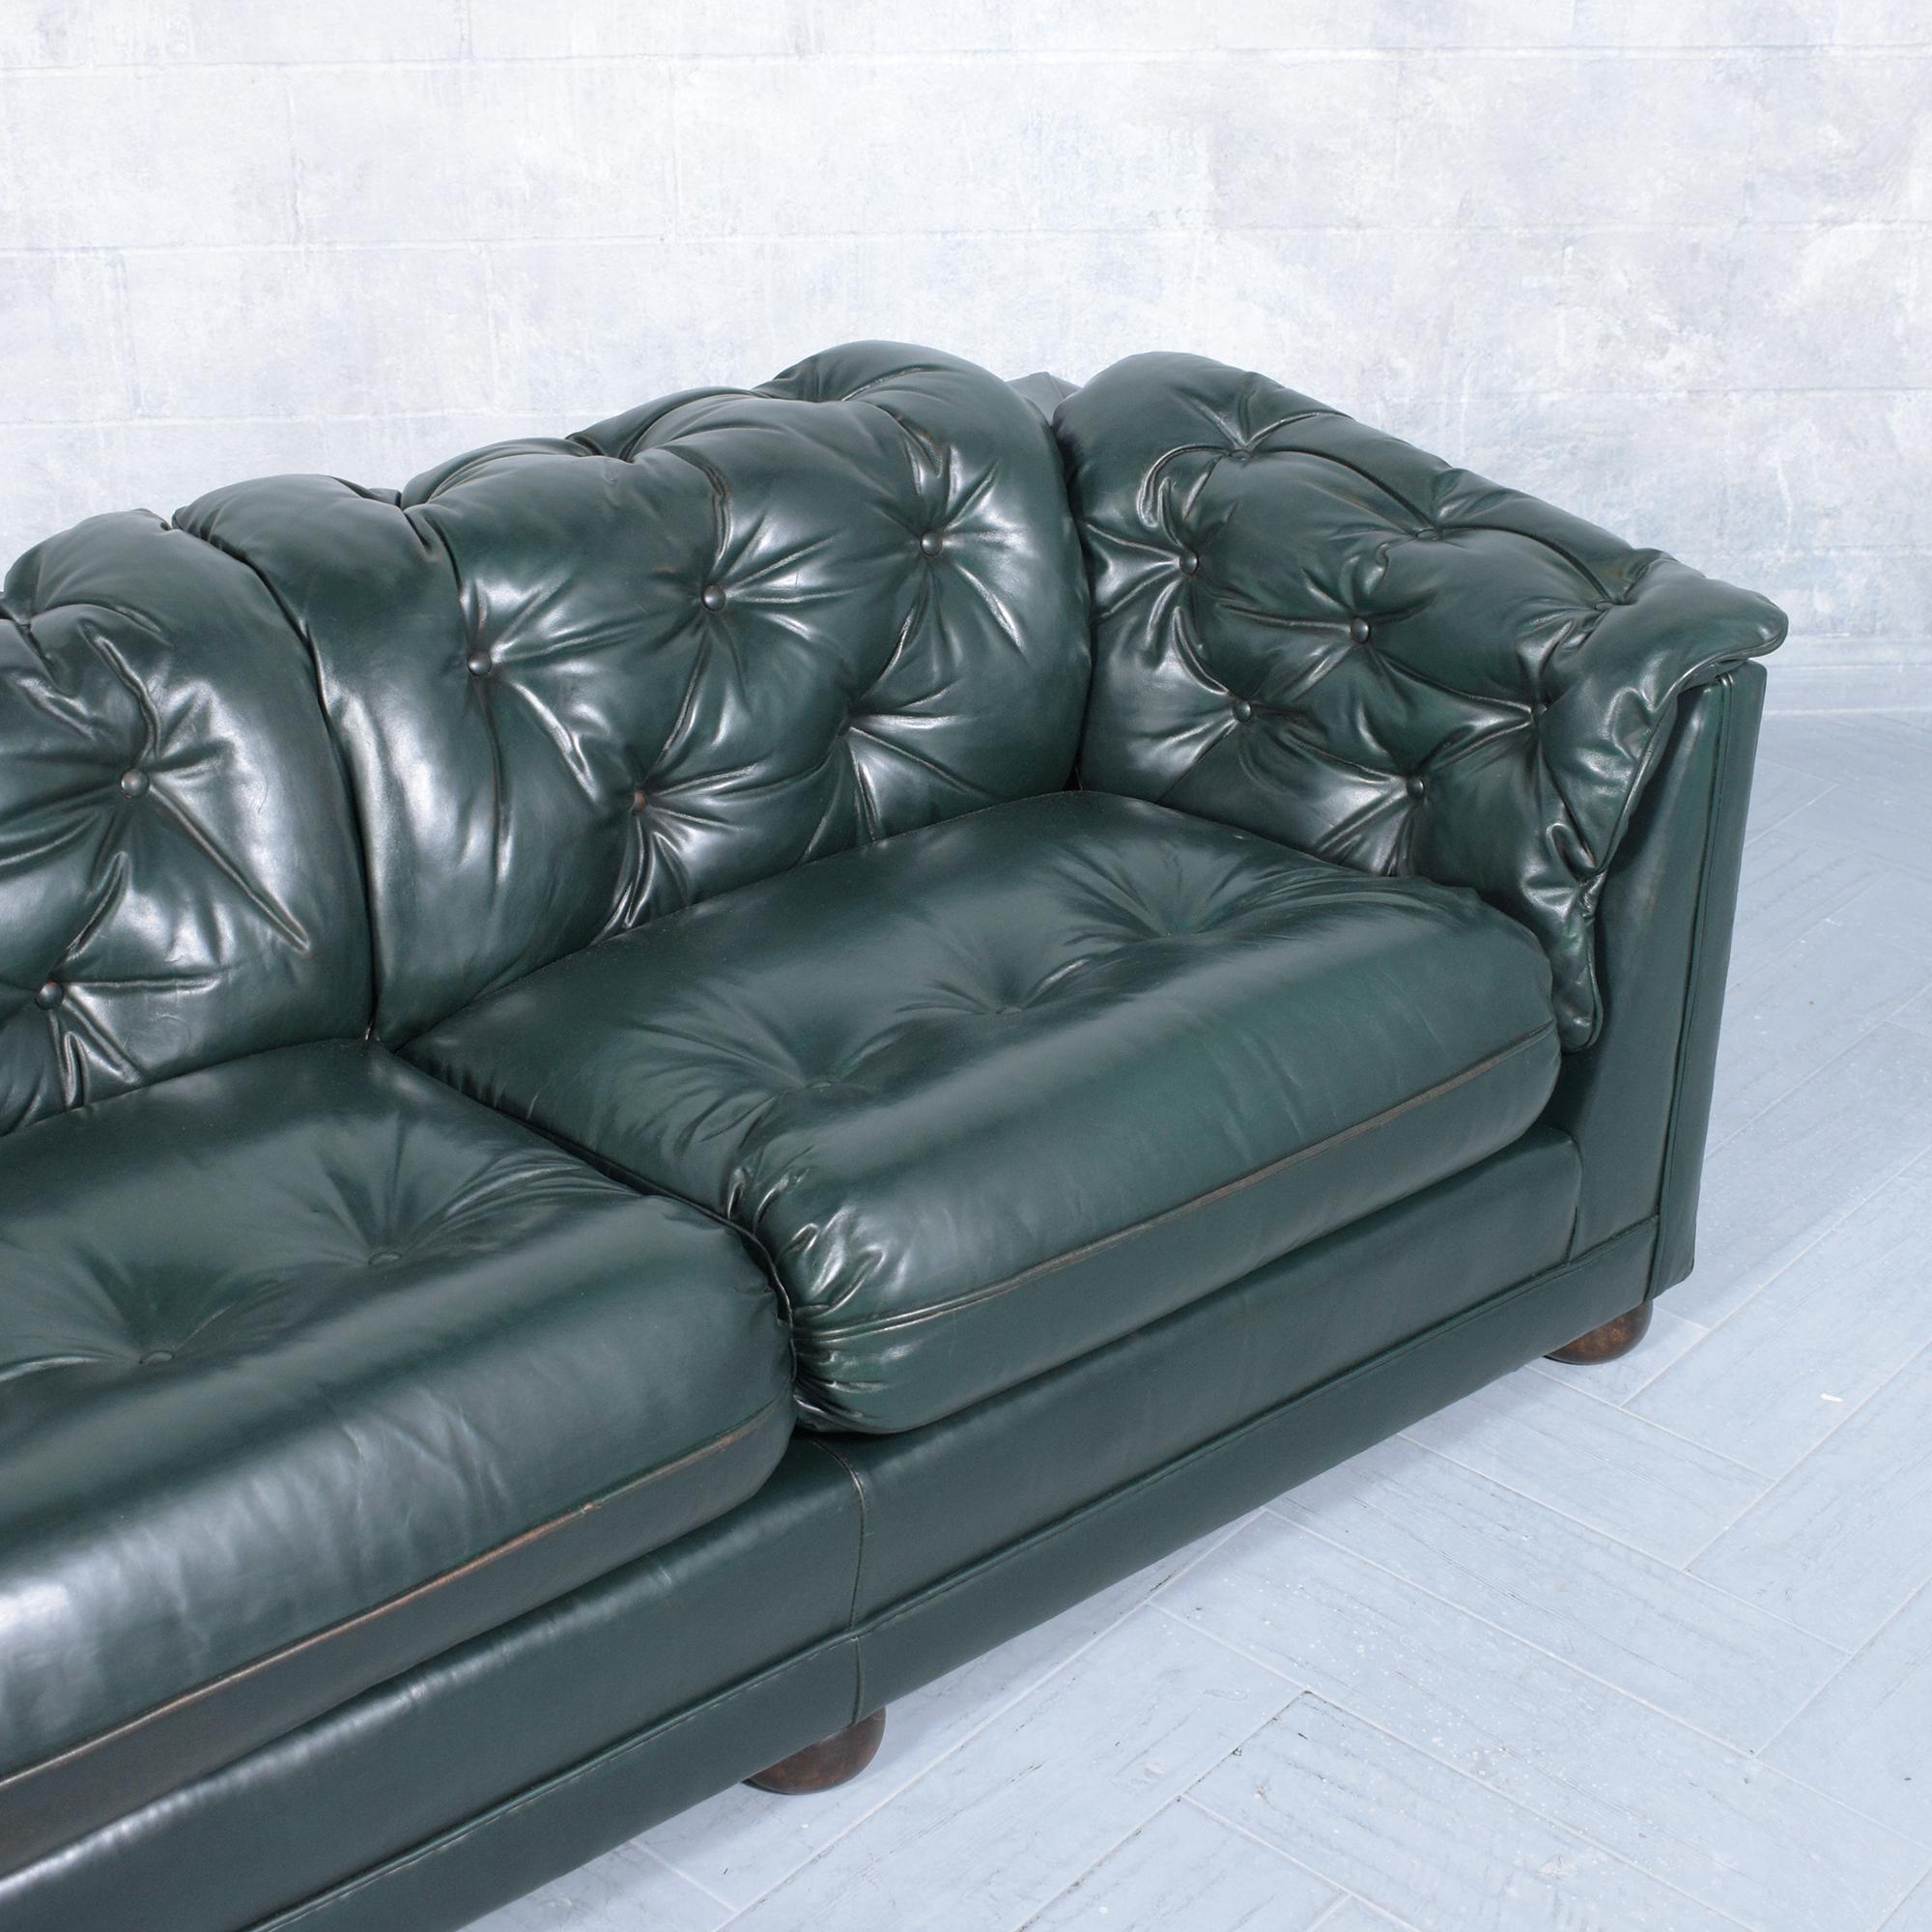 1960s Vintage Emerald Green Tufted Chesterfield Leather Sofa 4